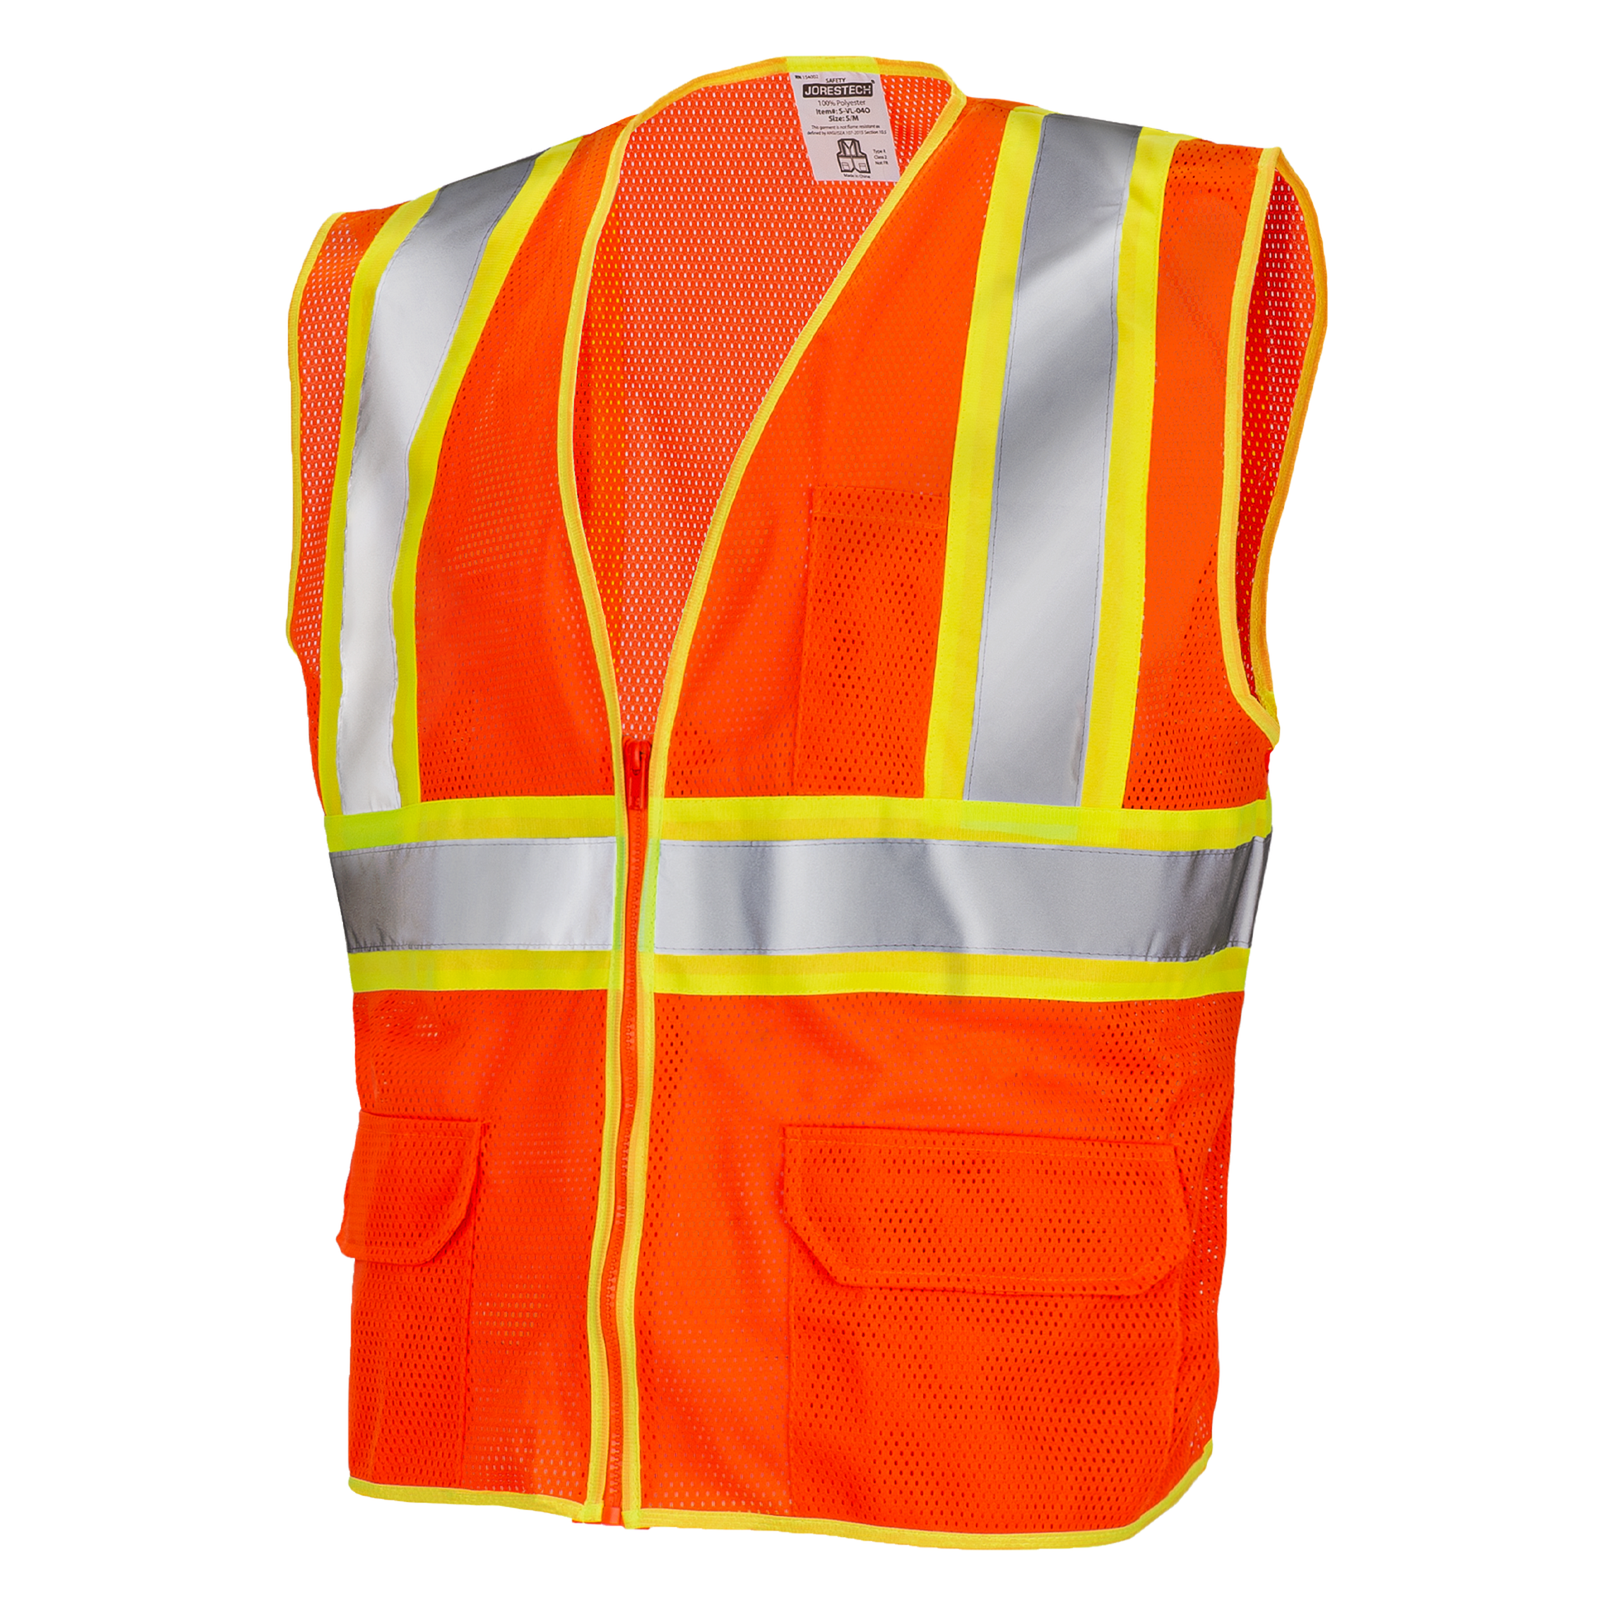 Diagonal view of the hi vis two toned orange mesh safety vest with 2 inches reflective strips and pockets over white background